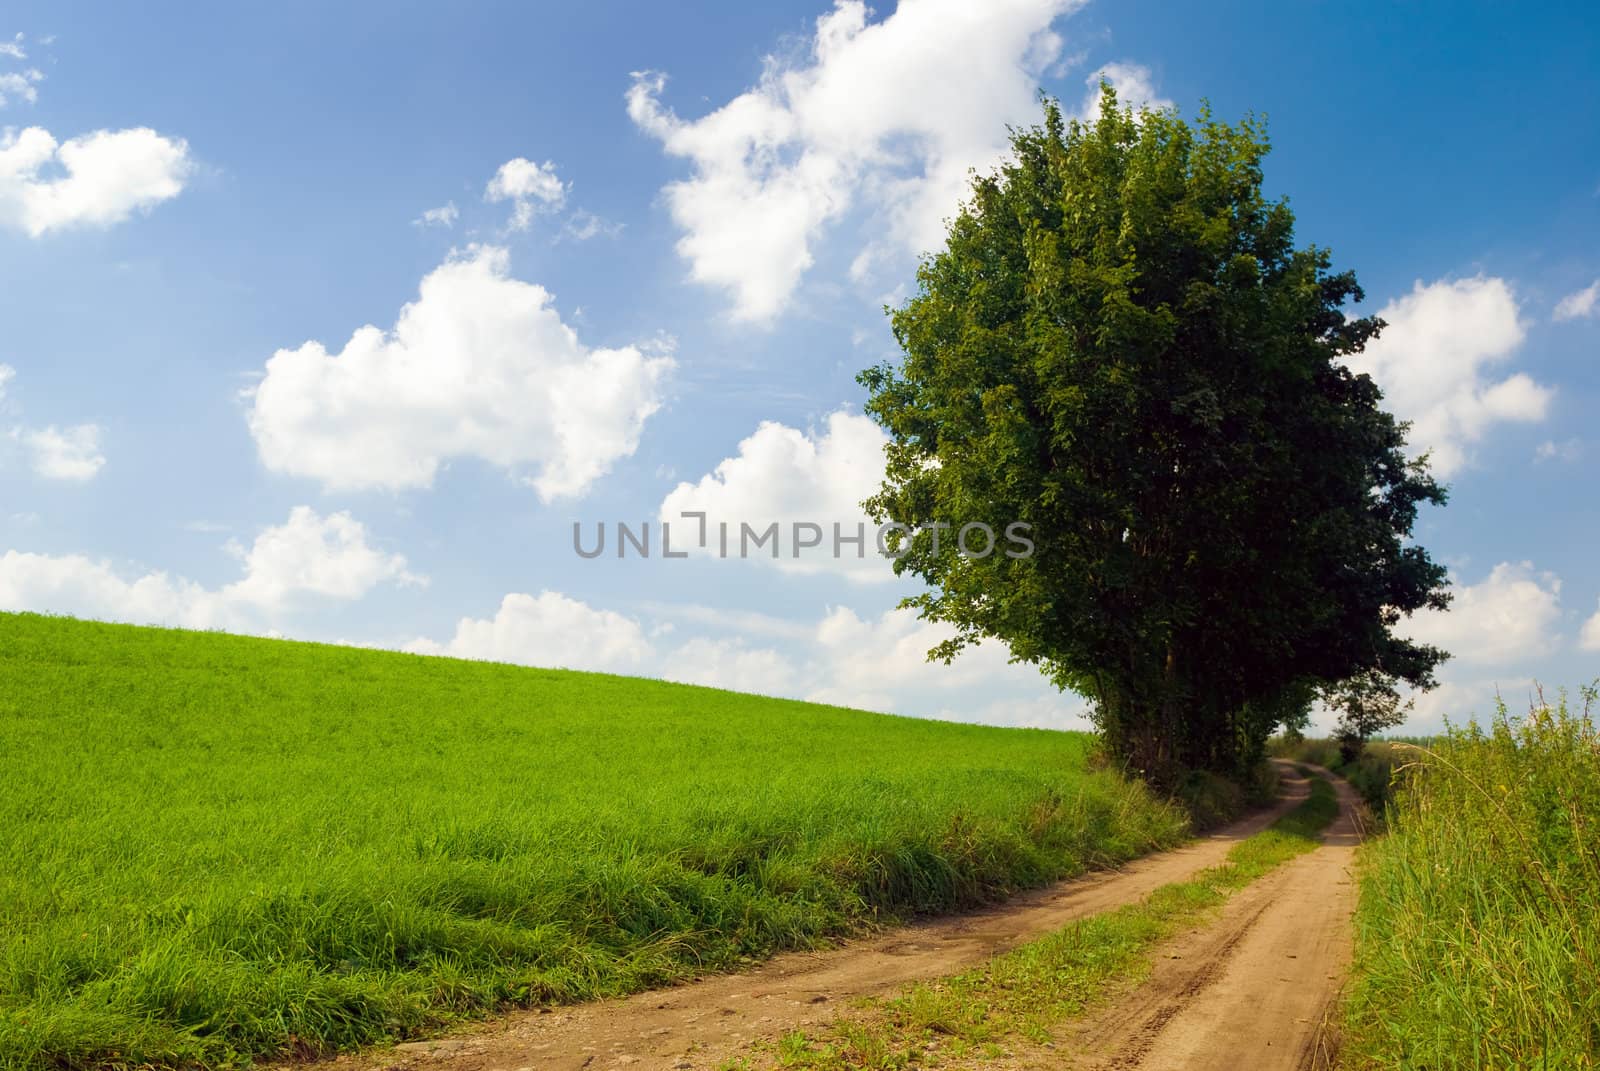 Saturated summer landscape - Lonely tree near country road. Mazury, Poland.